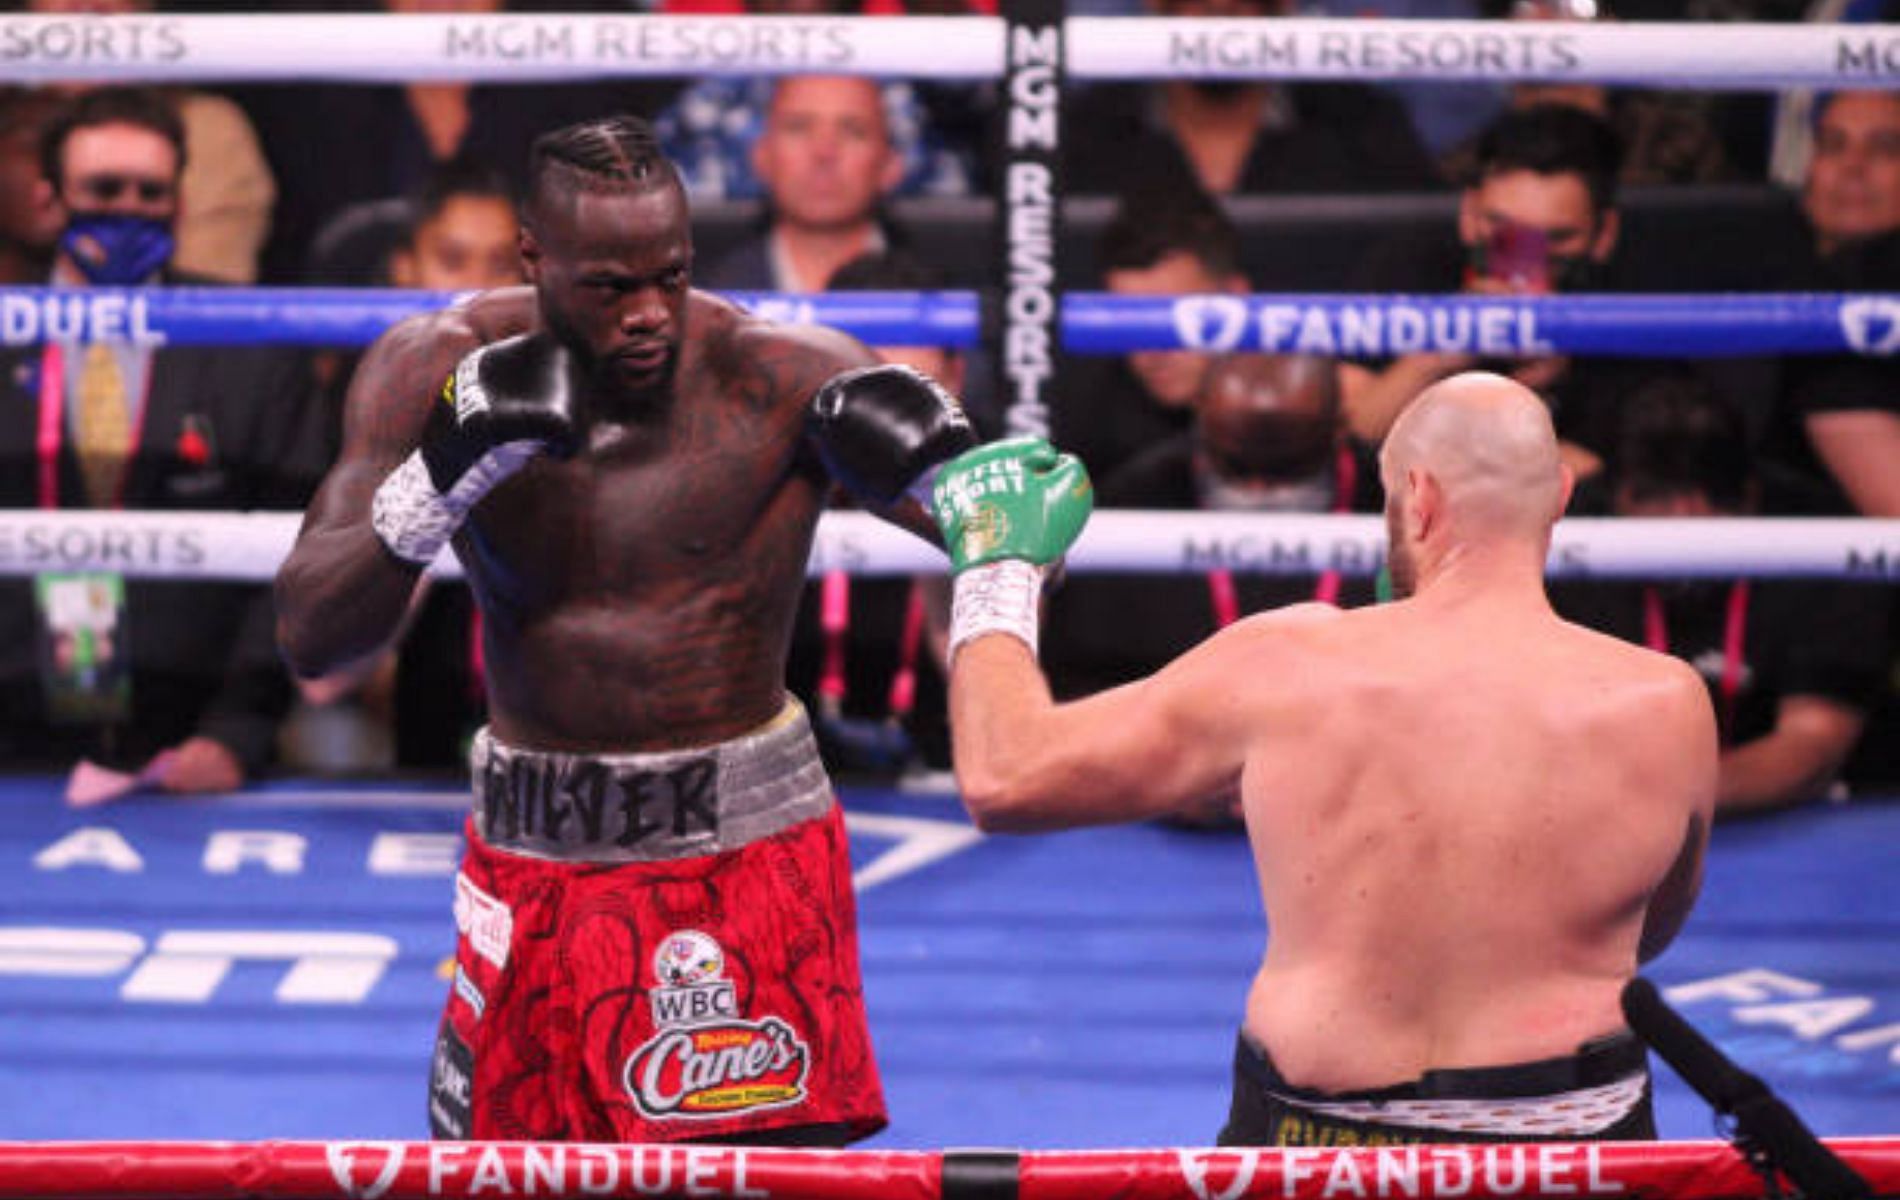 Deontay Wilder vs. Tyson Fury 3 at the T-Mobile Arena, Paradise, Nevada